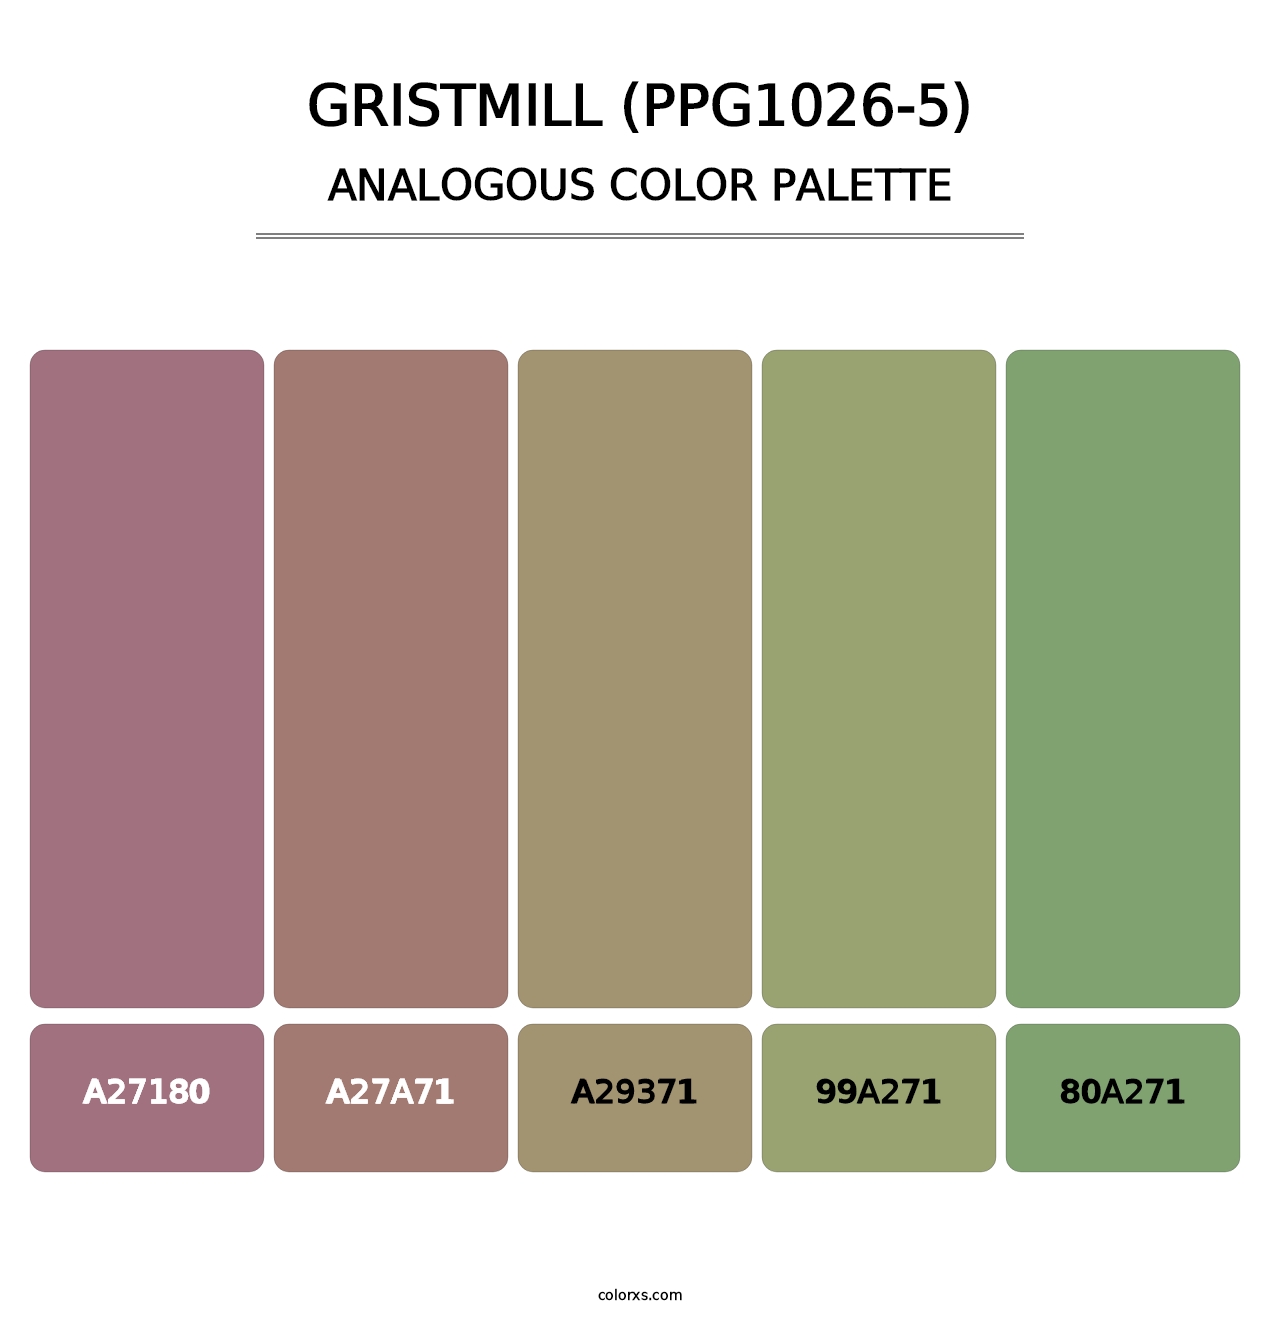 Gristmill (PPG1026-5) - Analogous Color Palette